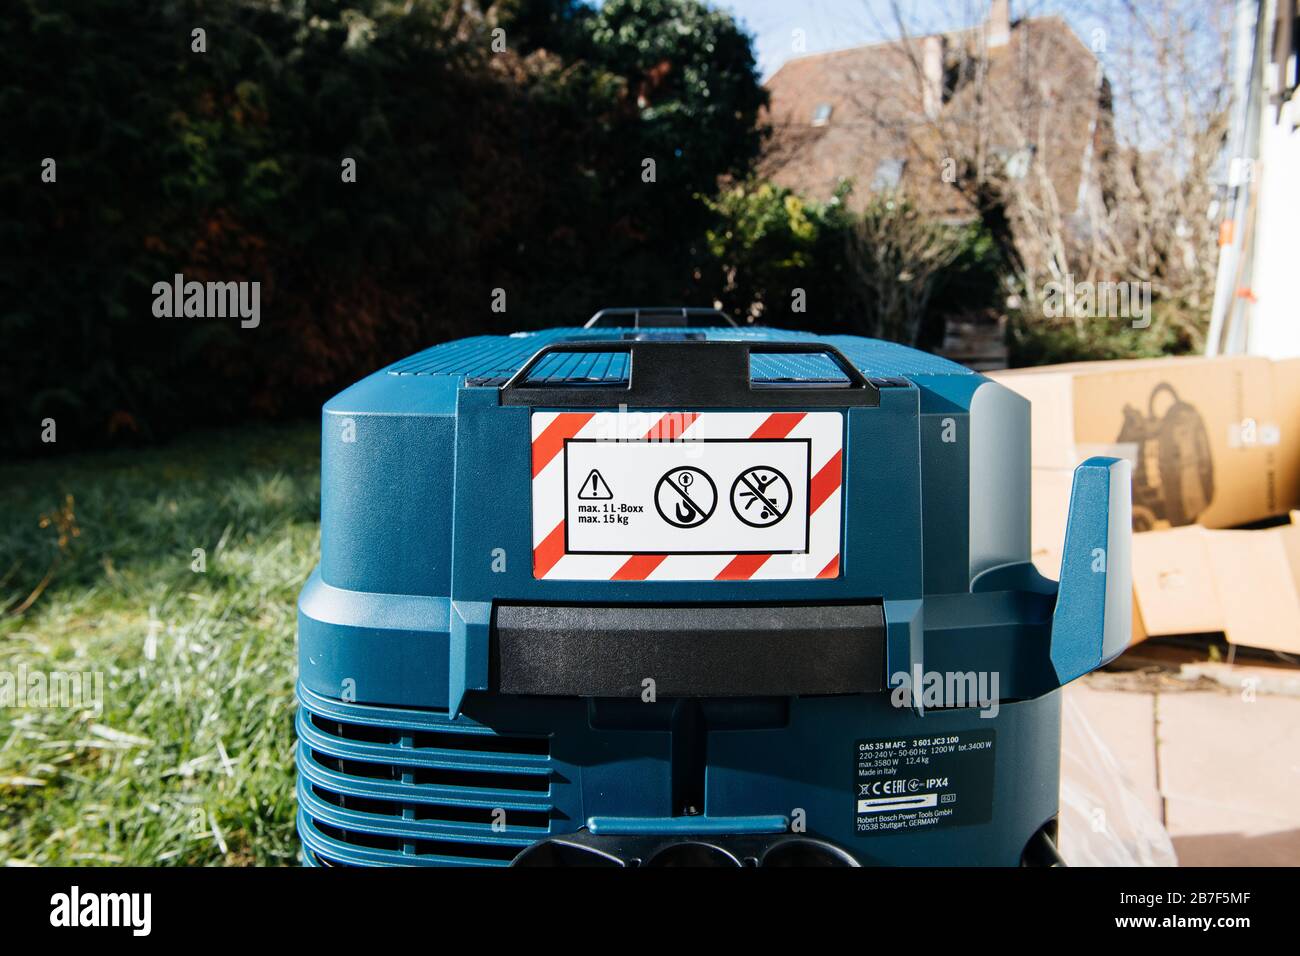 Strasbourg, France - Feb 9, 2020: Warning with 1 l-boxx and maxim 15 kg  load on top of new Bosch GAS 35 M AFC Professional Wet and Dry Vacuum  Cleaner, 35 L